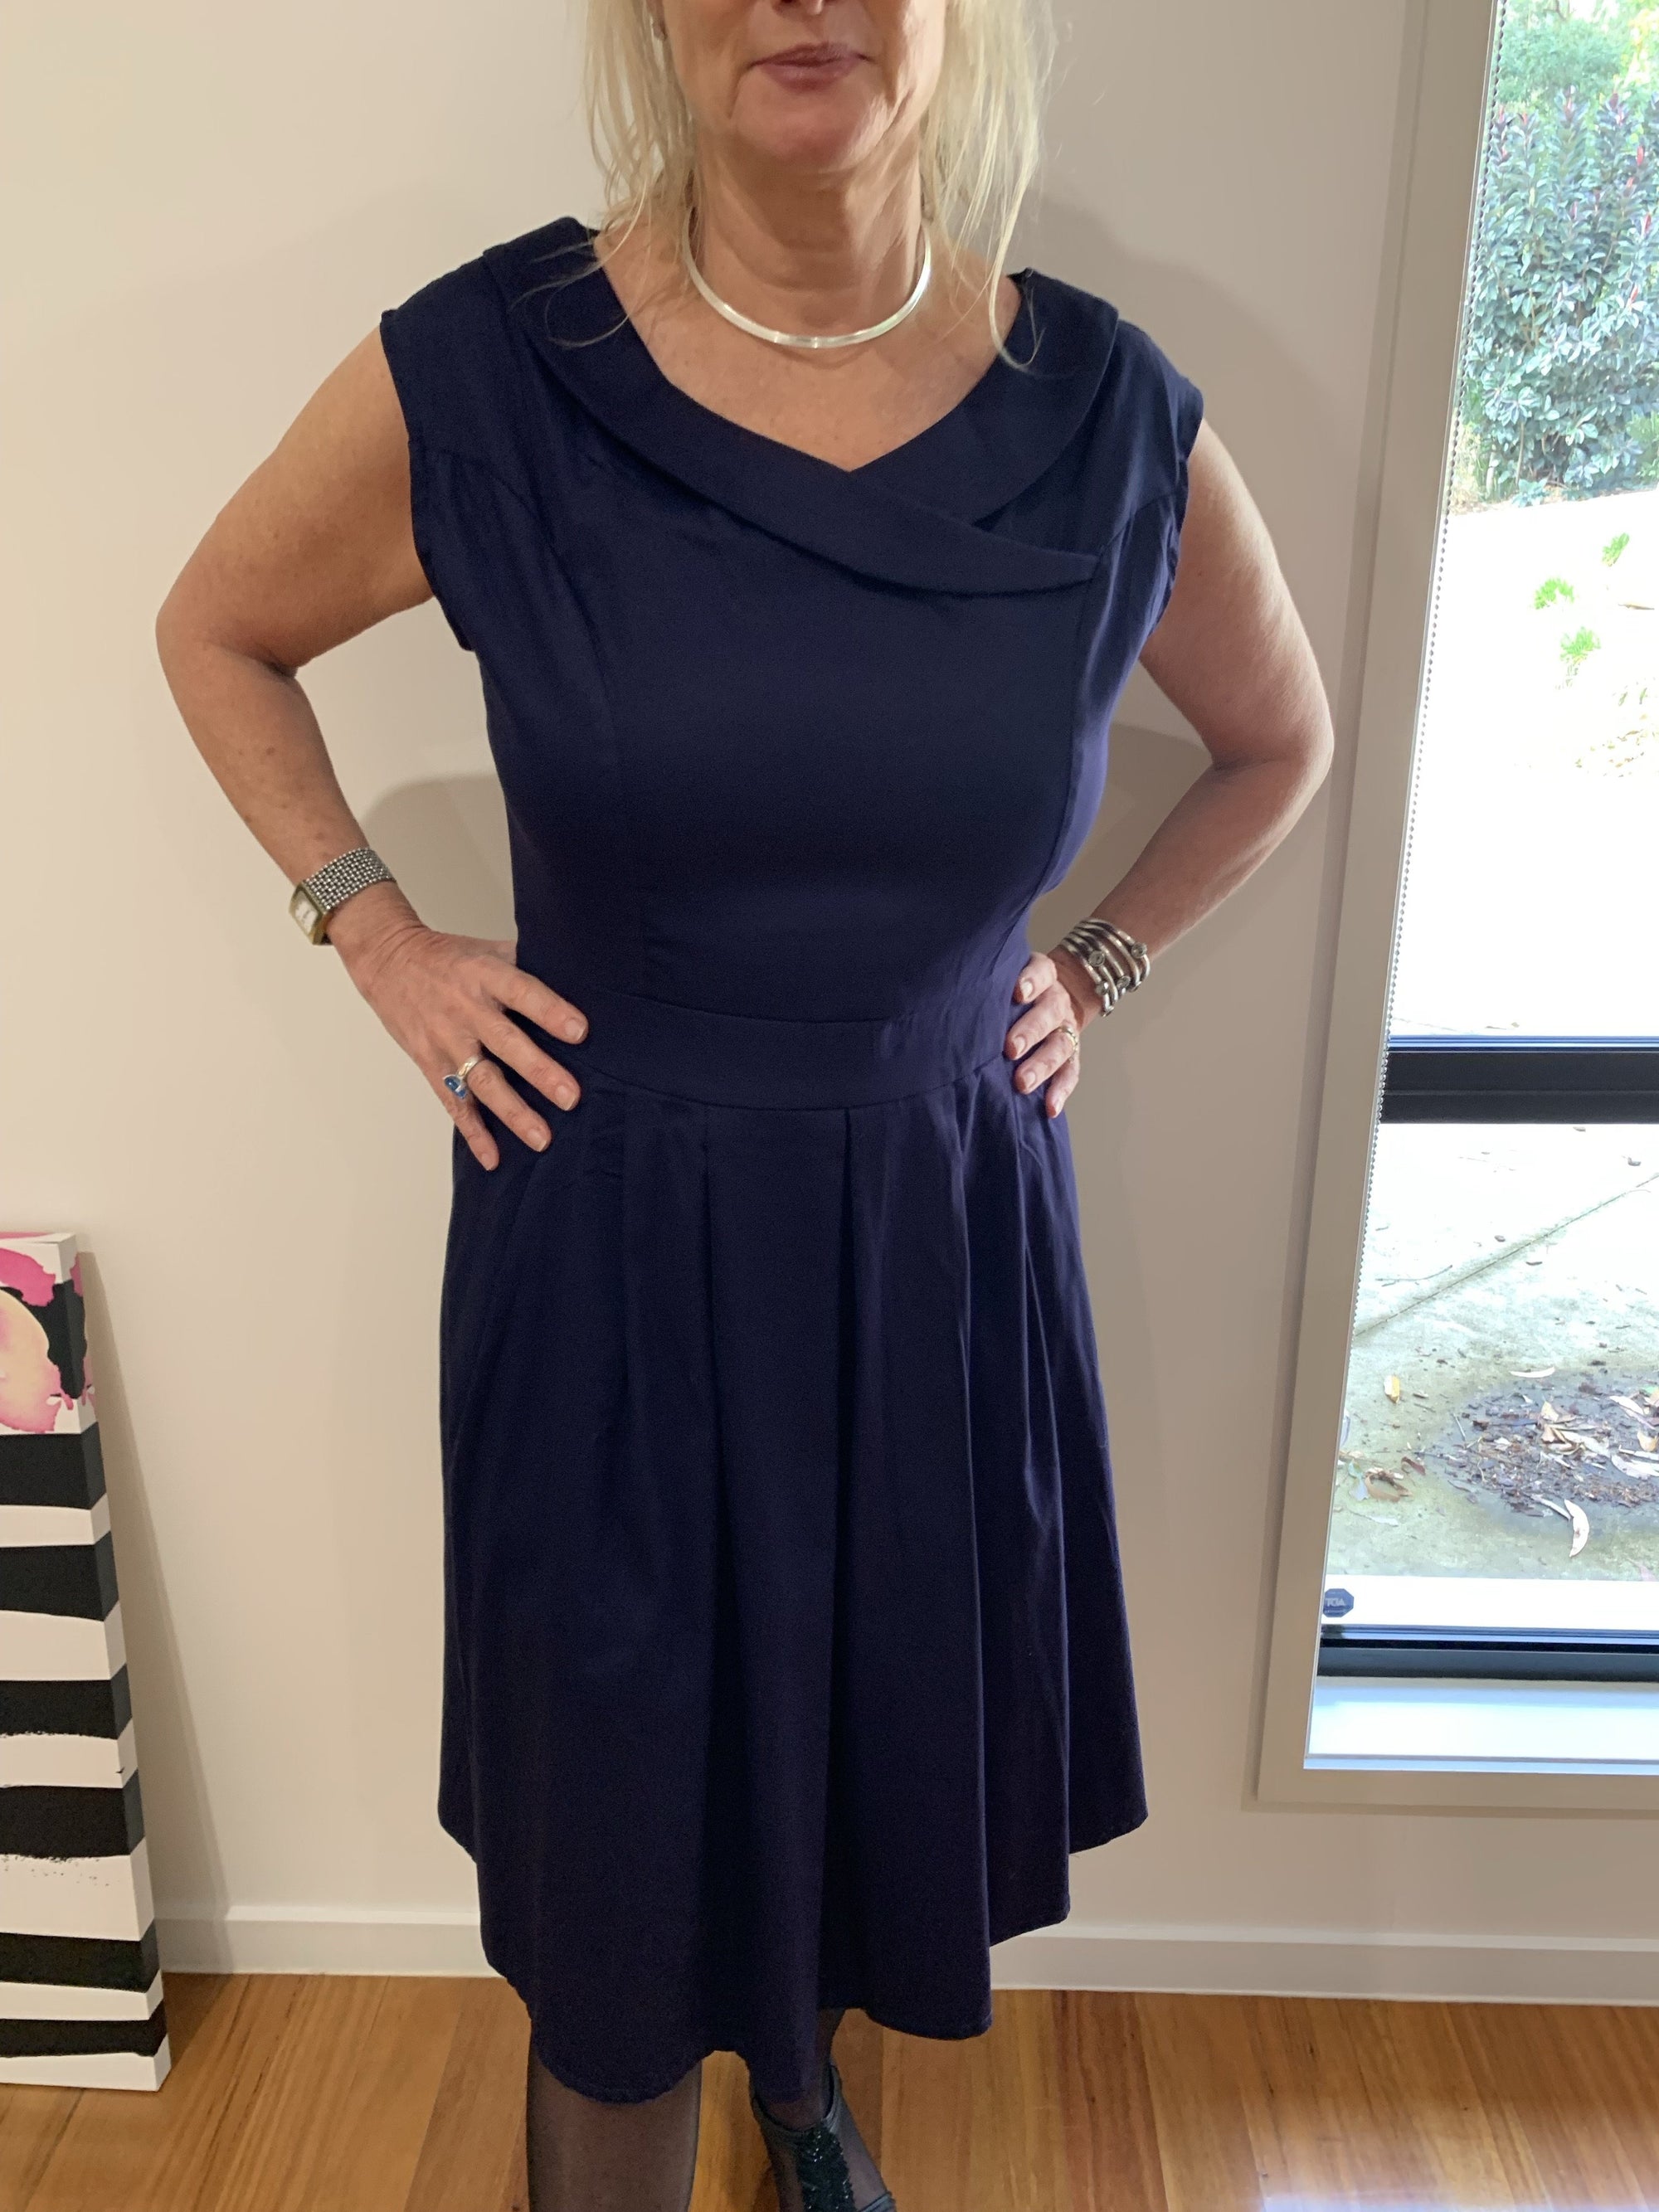 Timeless by Vanessa Tong Classic Navy Vintage/Retro Style Dress